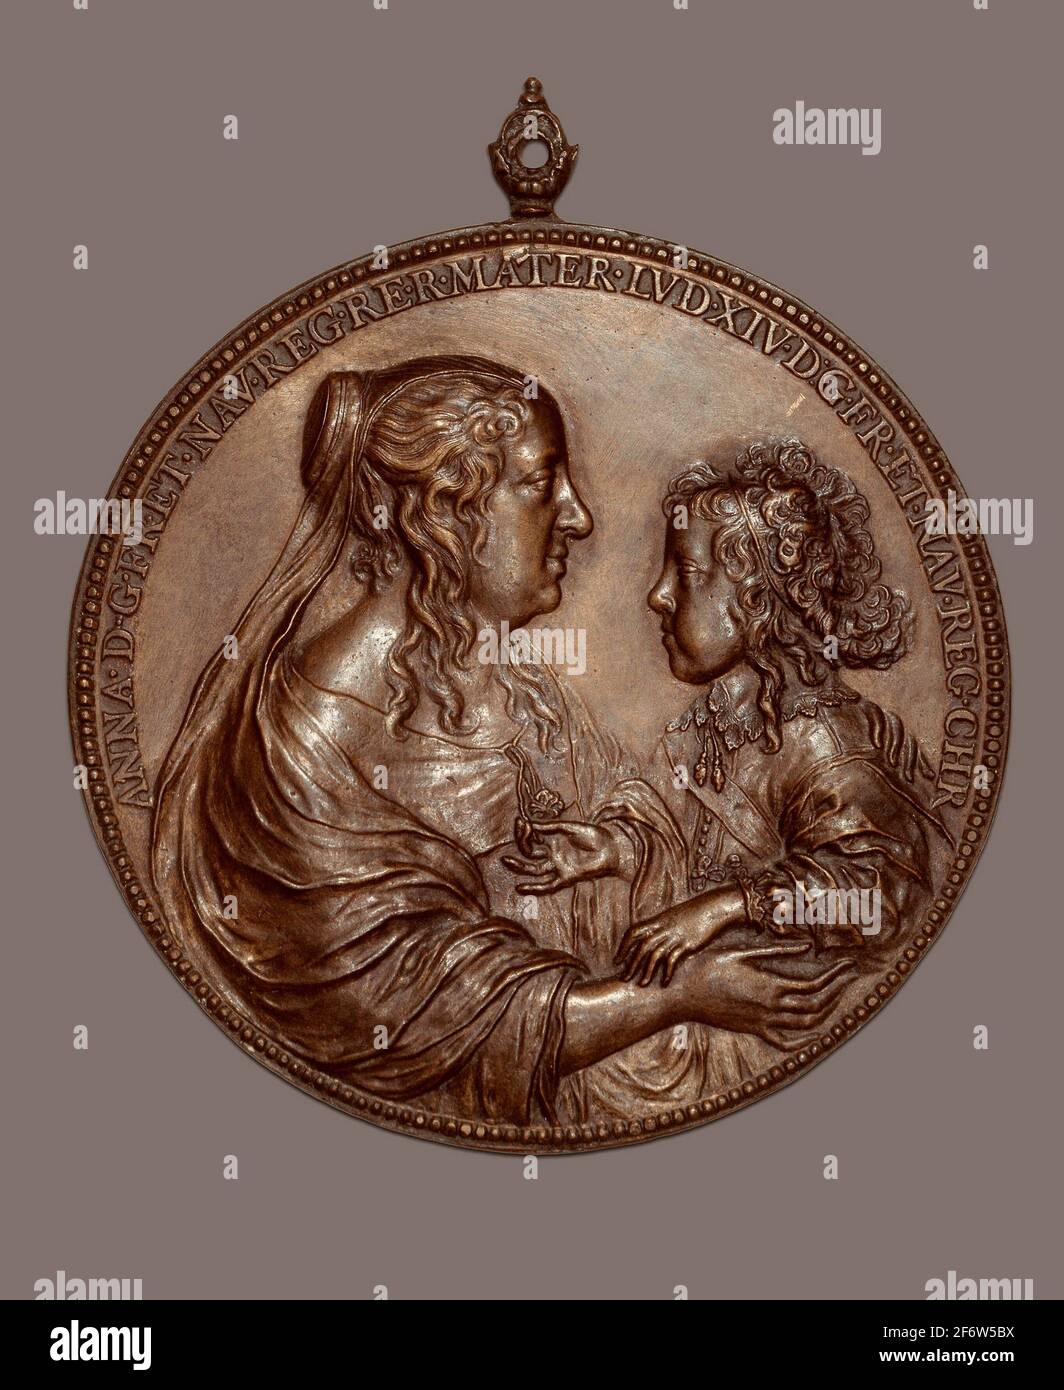 Author: Jean Warin, II. Portrait Medallion: Anne of Austria and her Son, the future King Louis XIV - 1638/48 - Jean Warin, III, Attributed to French, Stock Photo